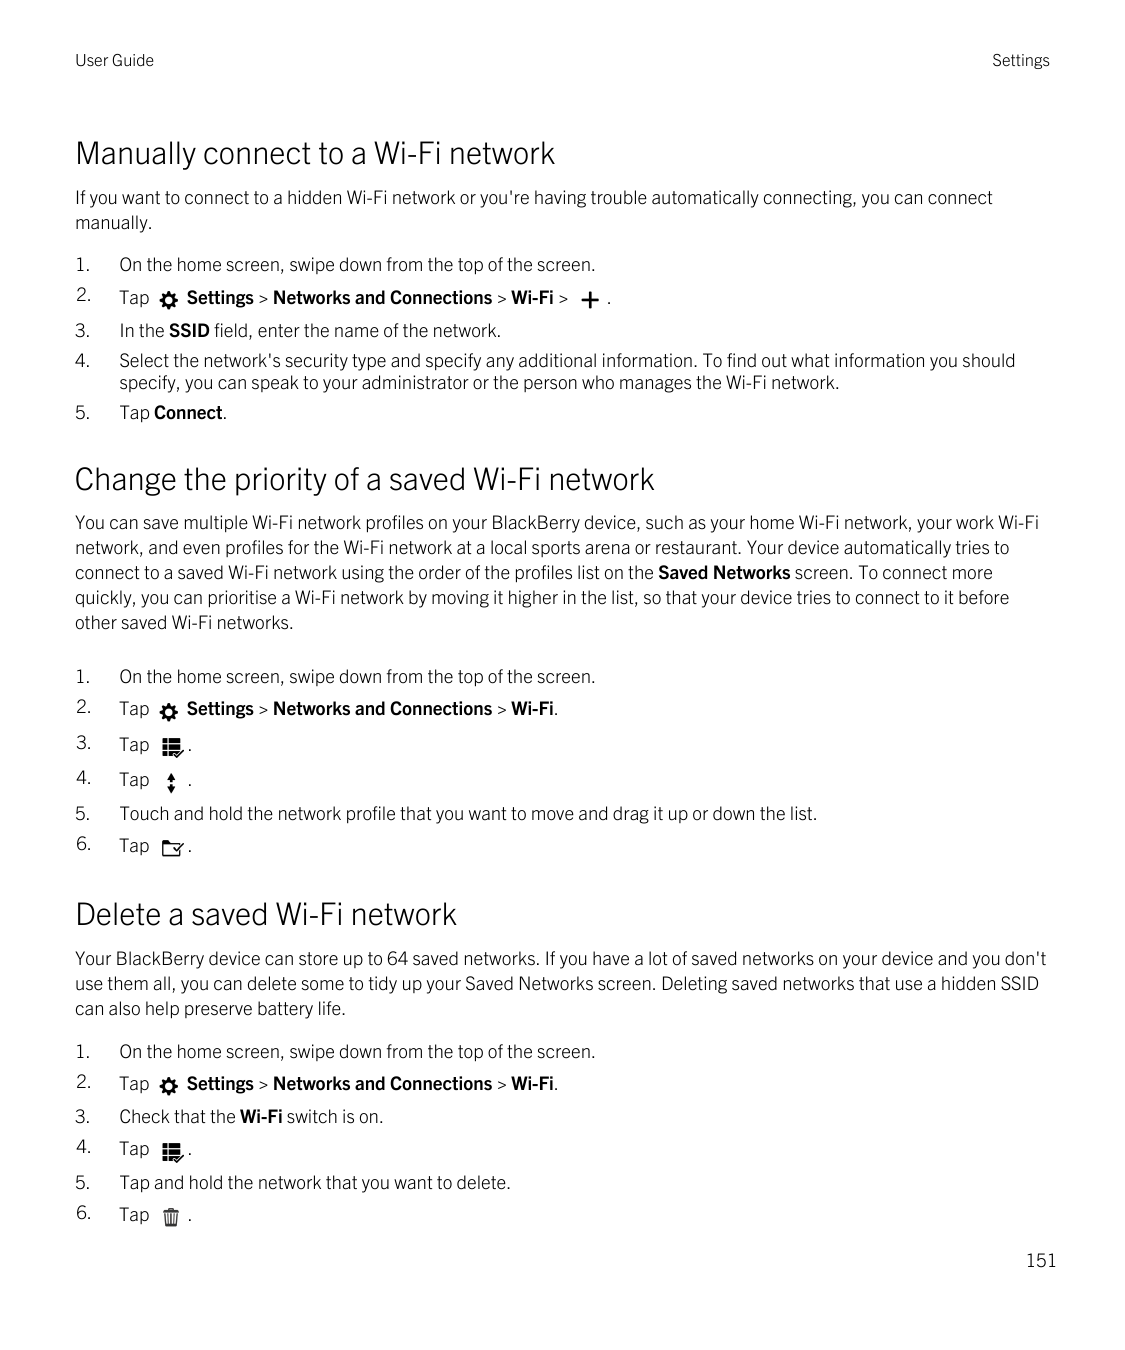 User GuideSettingsManually connect to a Wi-Fi networkIf you want to connect to a hidden Wi-Fi network or you're having trouble a